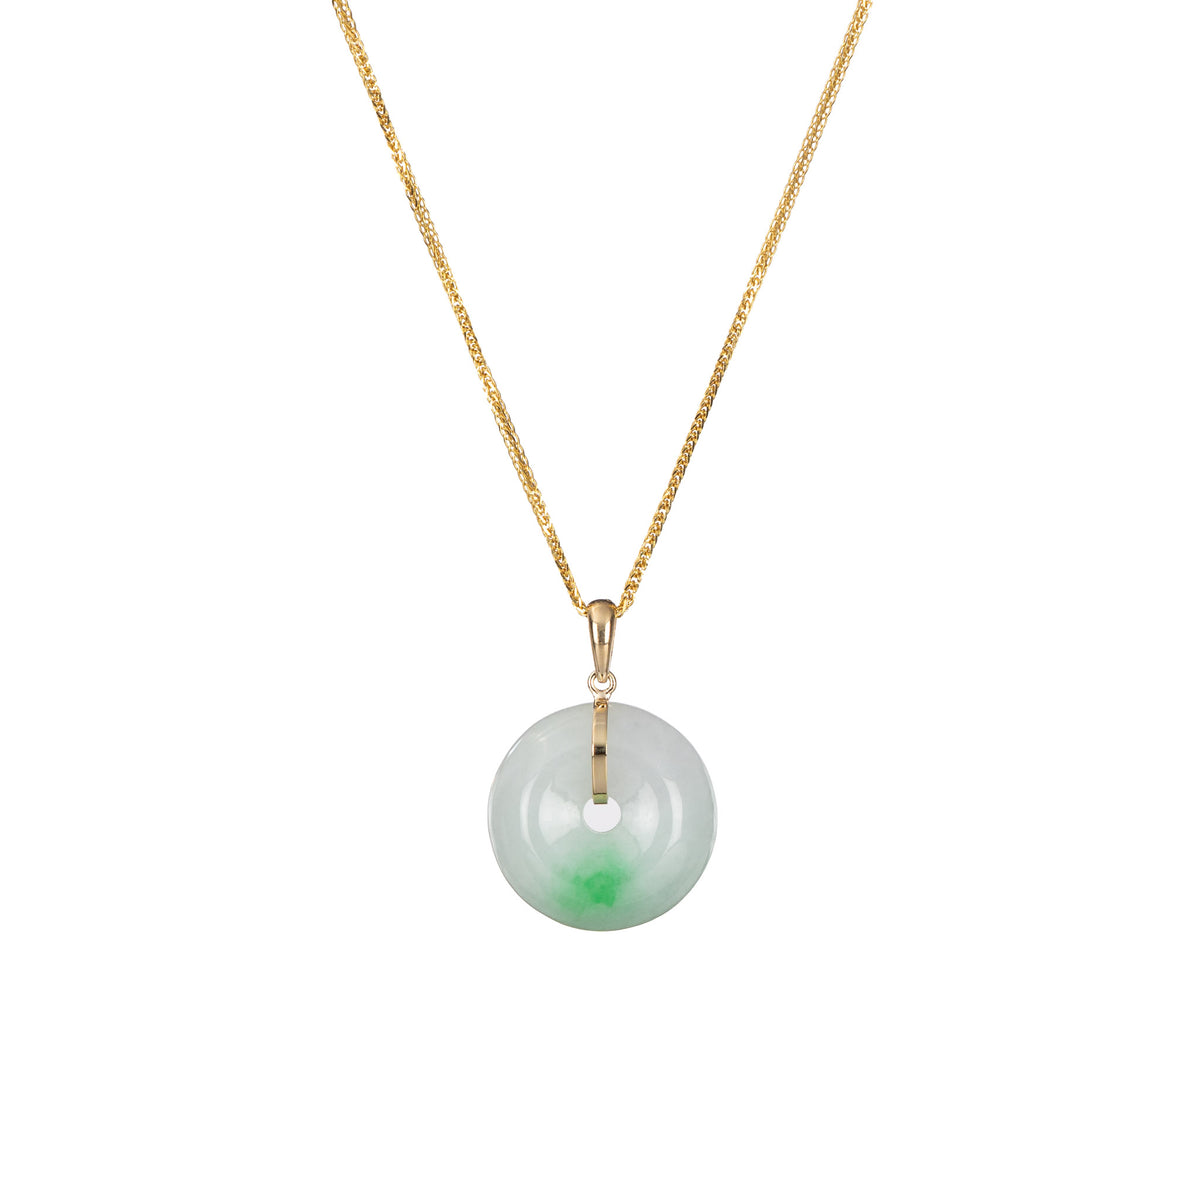 Small Apple Green and White Jadeite Disc Pendant